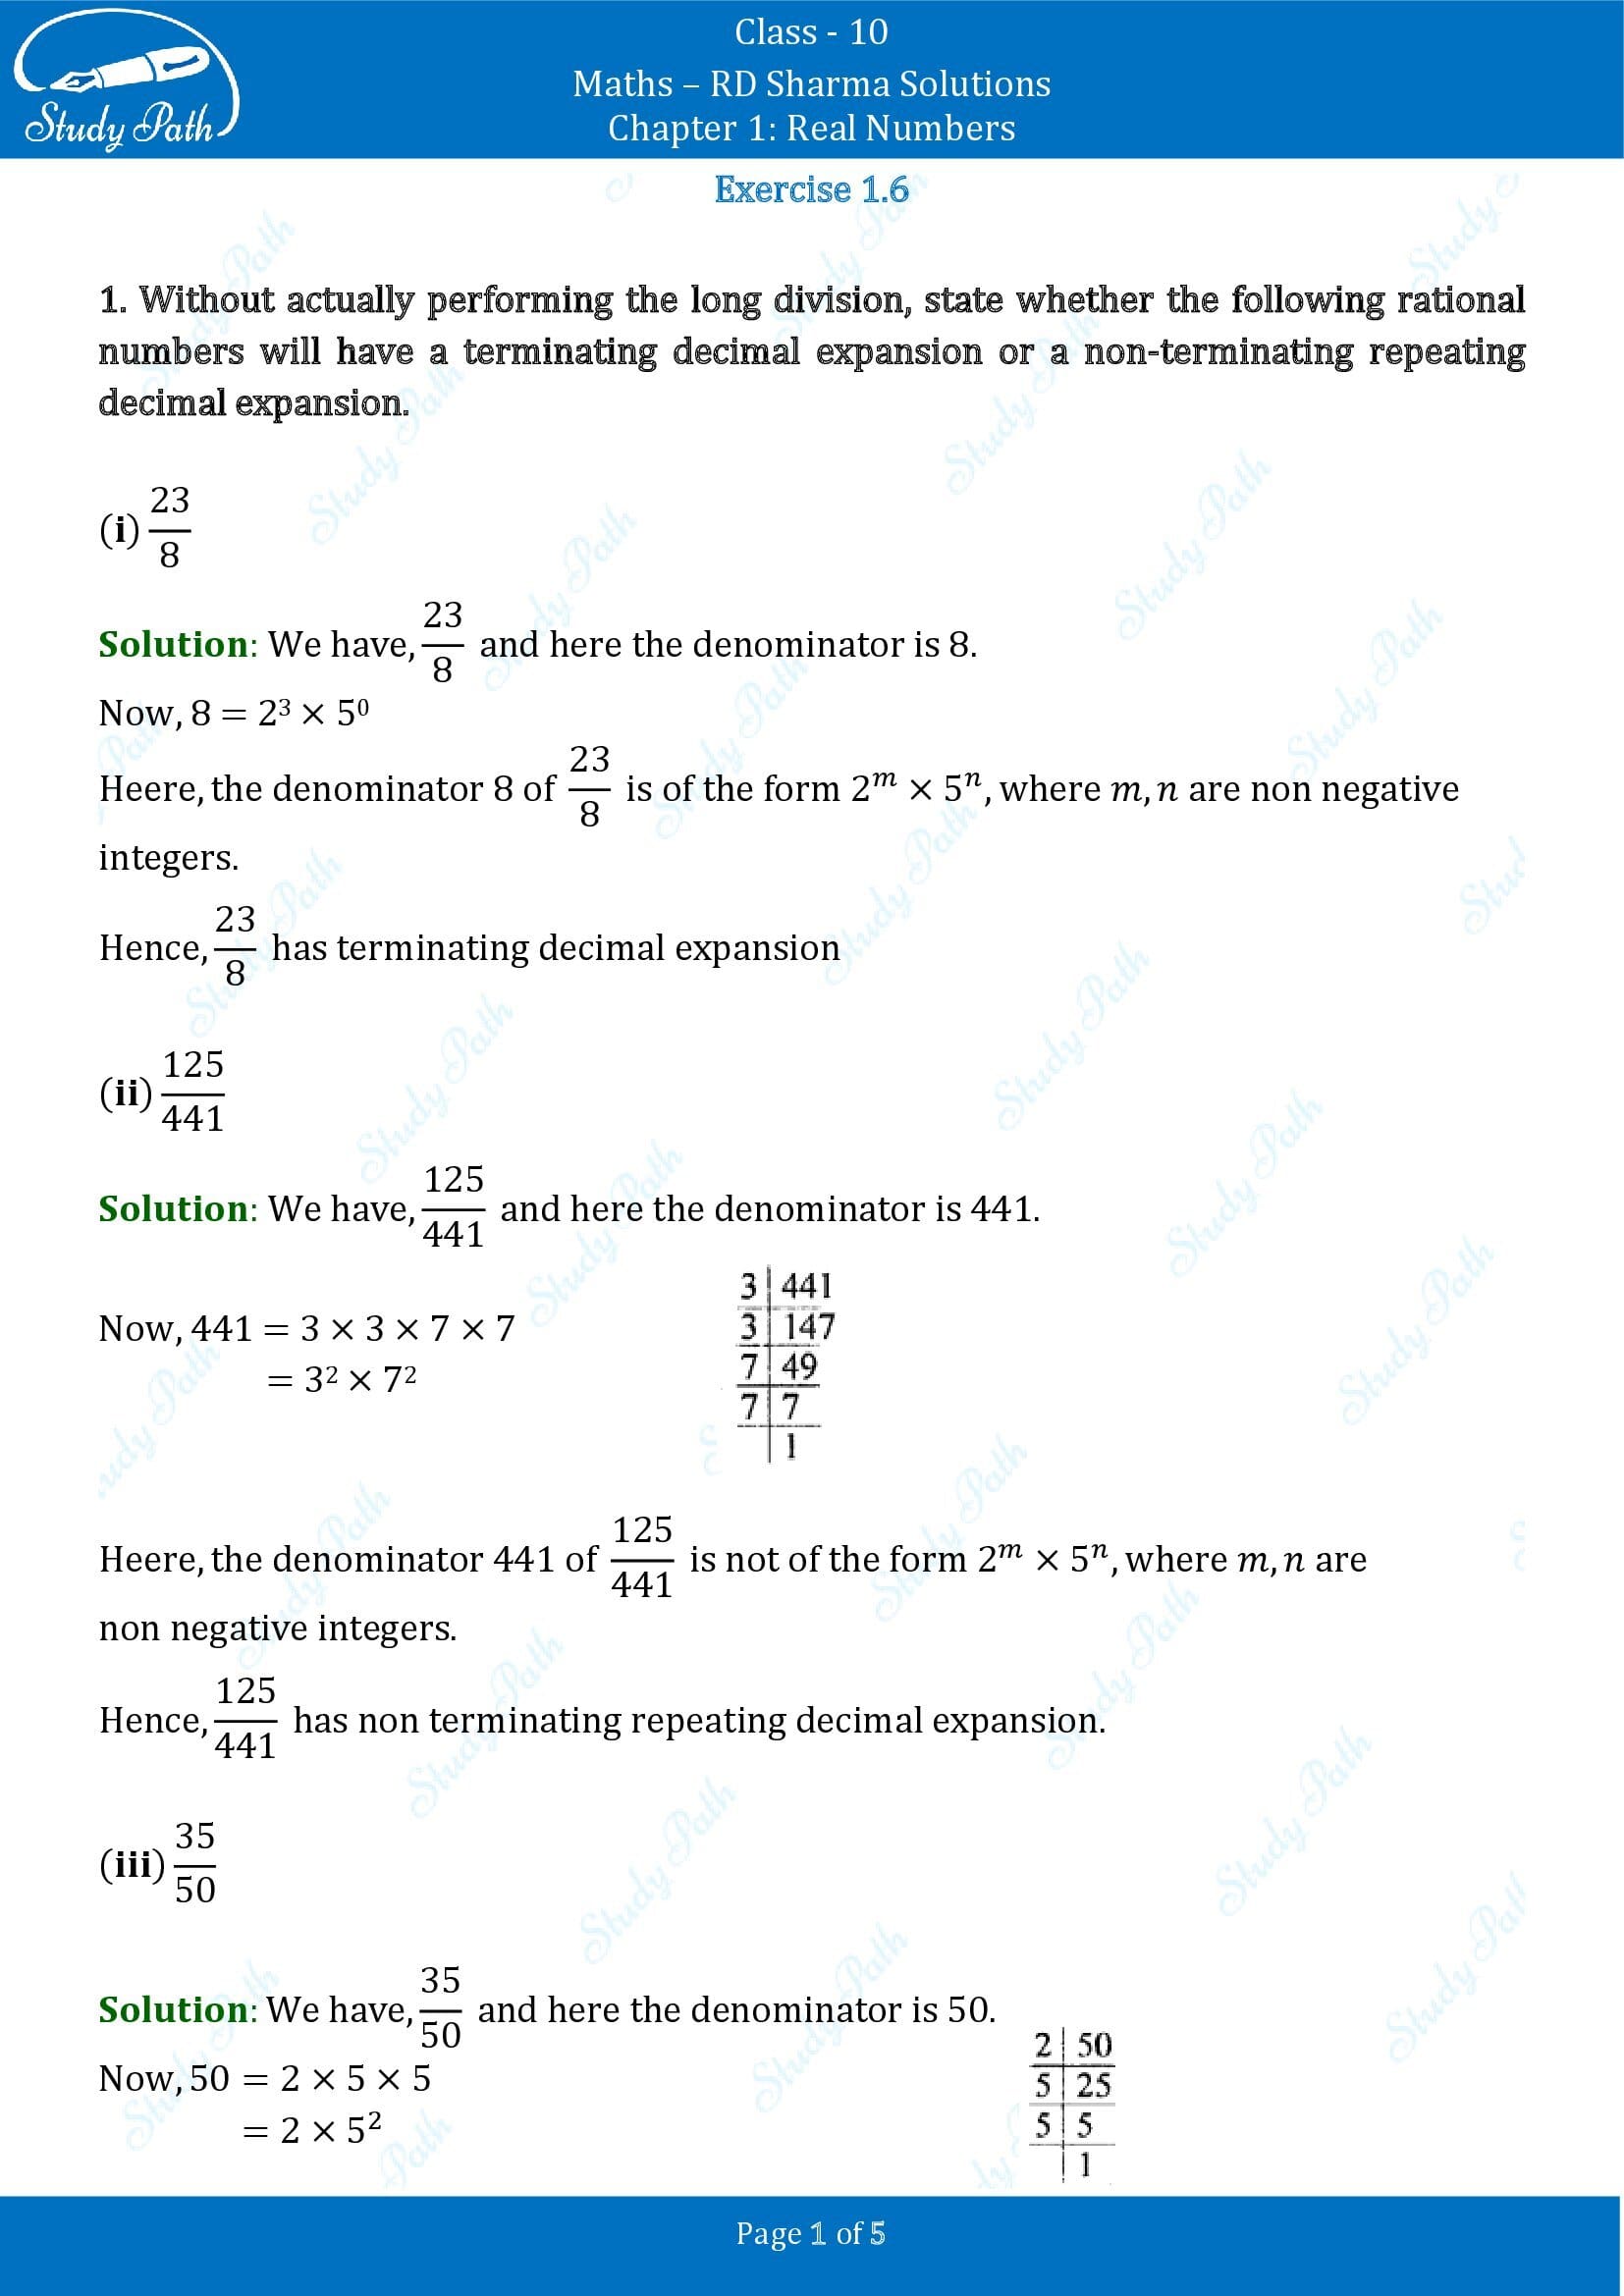 RD Sharma Solutions Class 10 Chapter 1 Real Numbers Exercise 1.6 00001